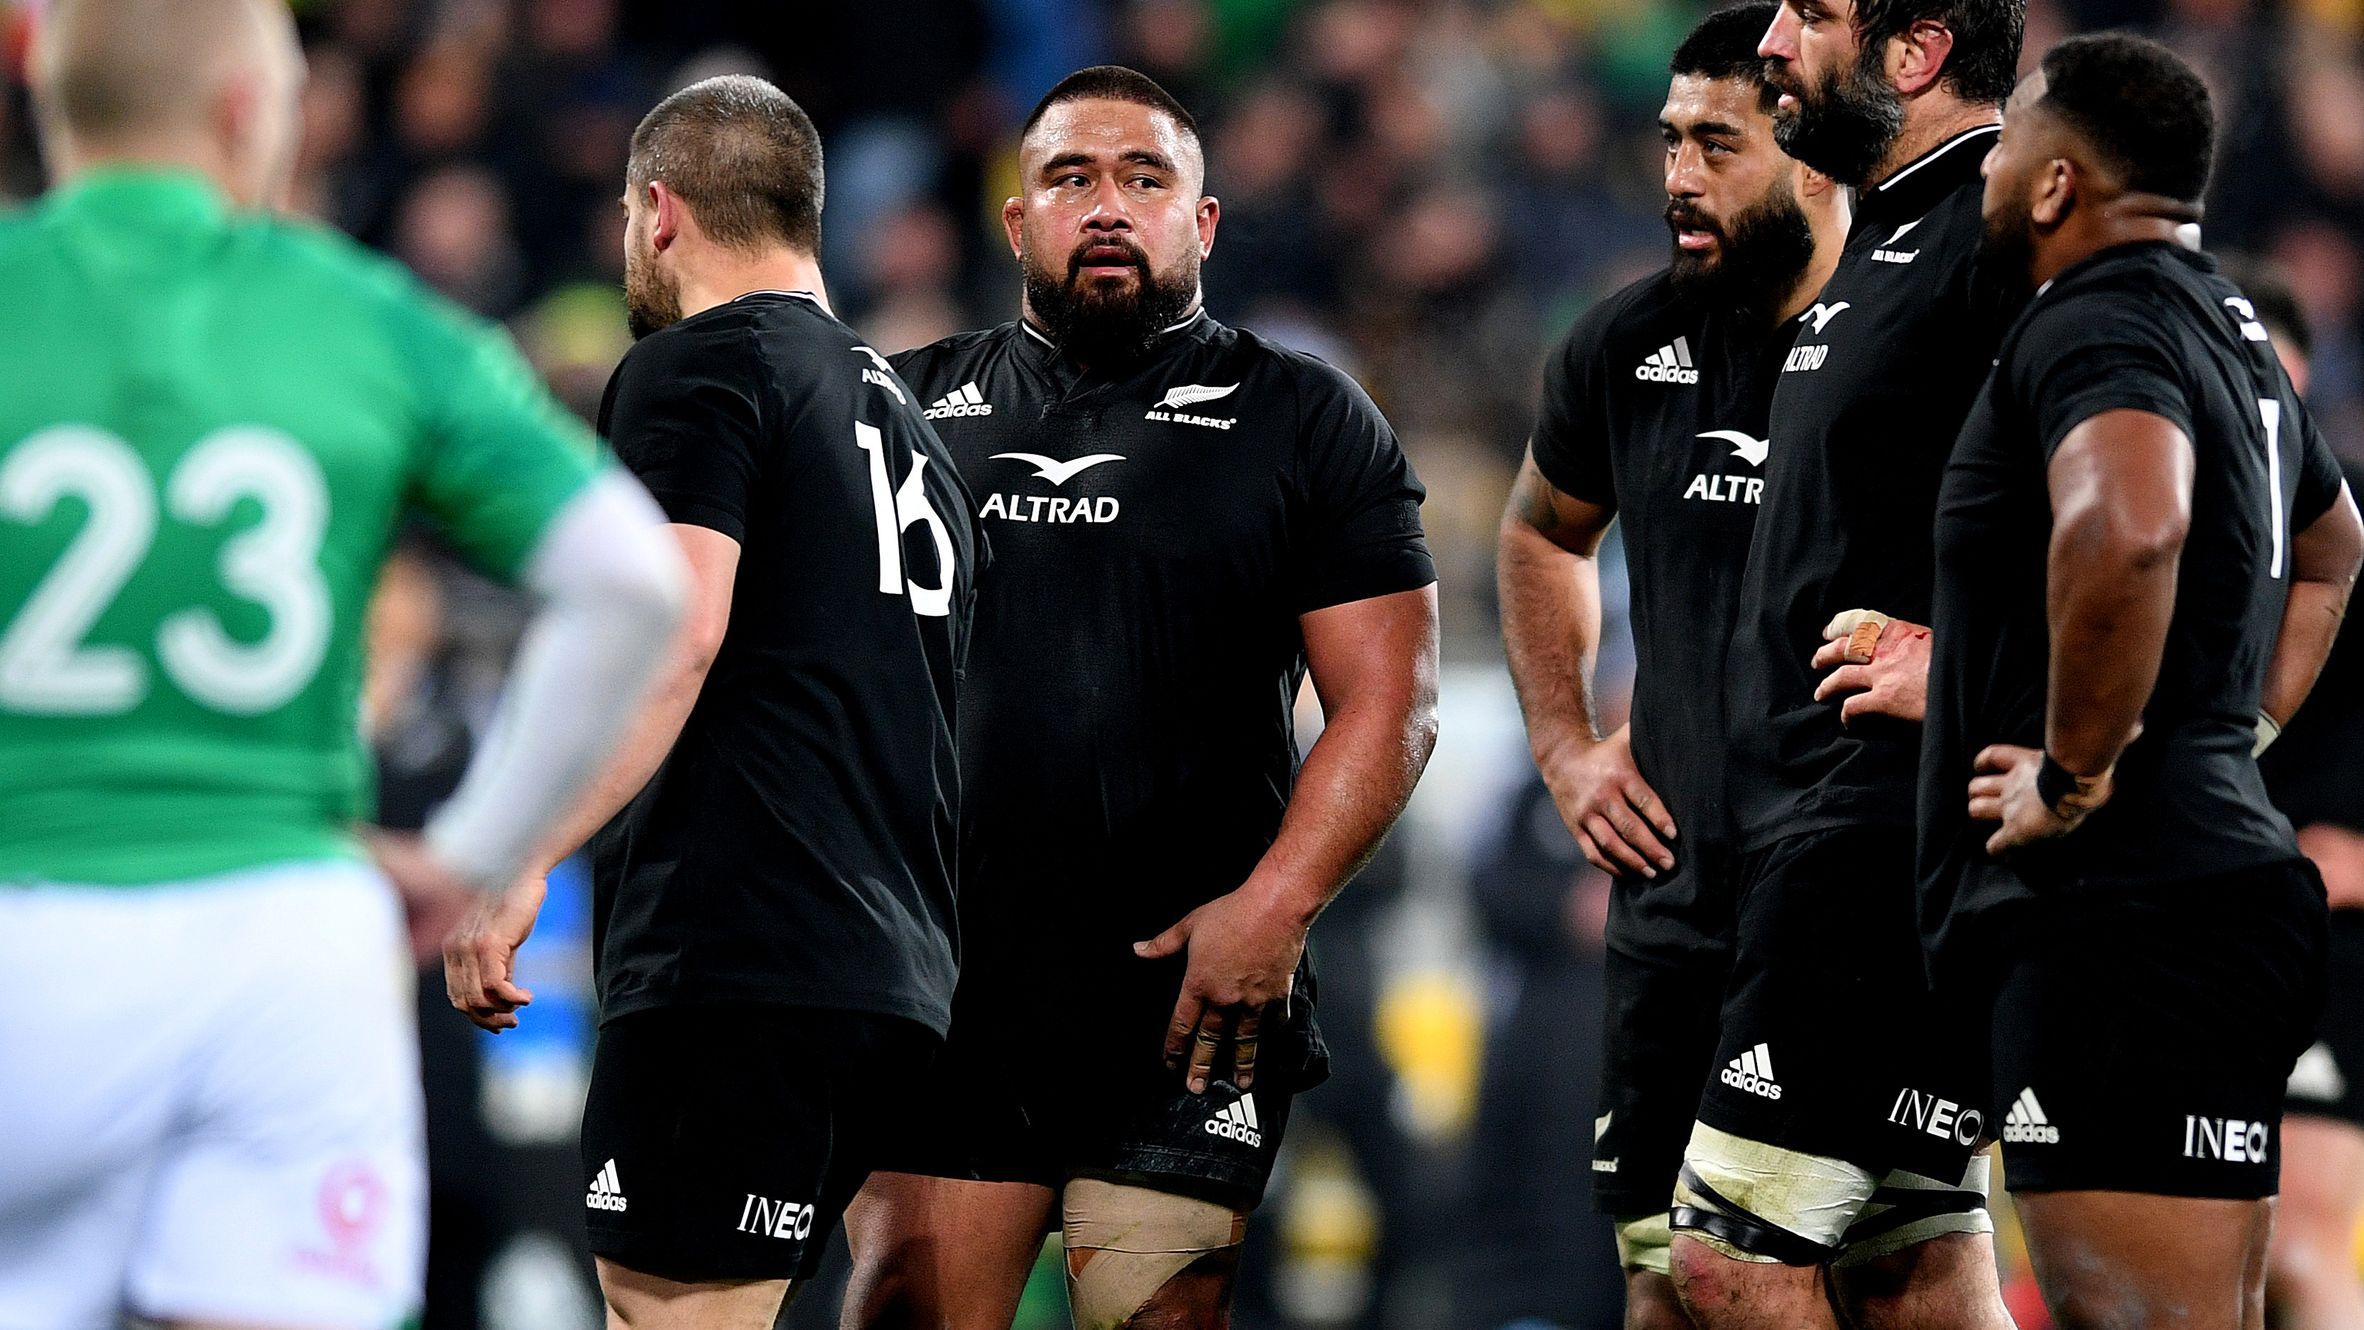 Nepo Laulala of the All Blacks looks on during the International Test match between the New Zealand All Blacks and Ireland at Sky Stadium.